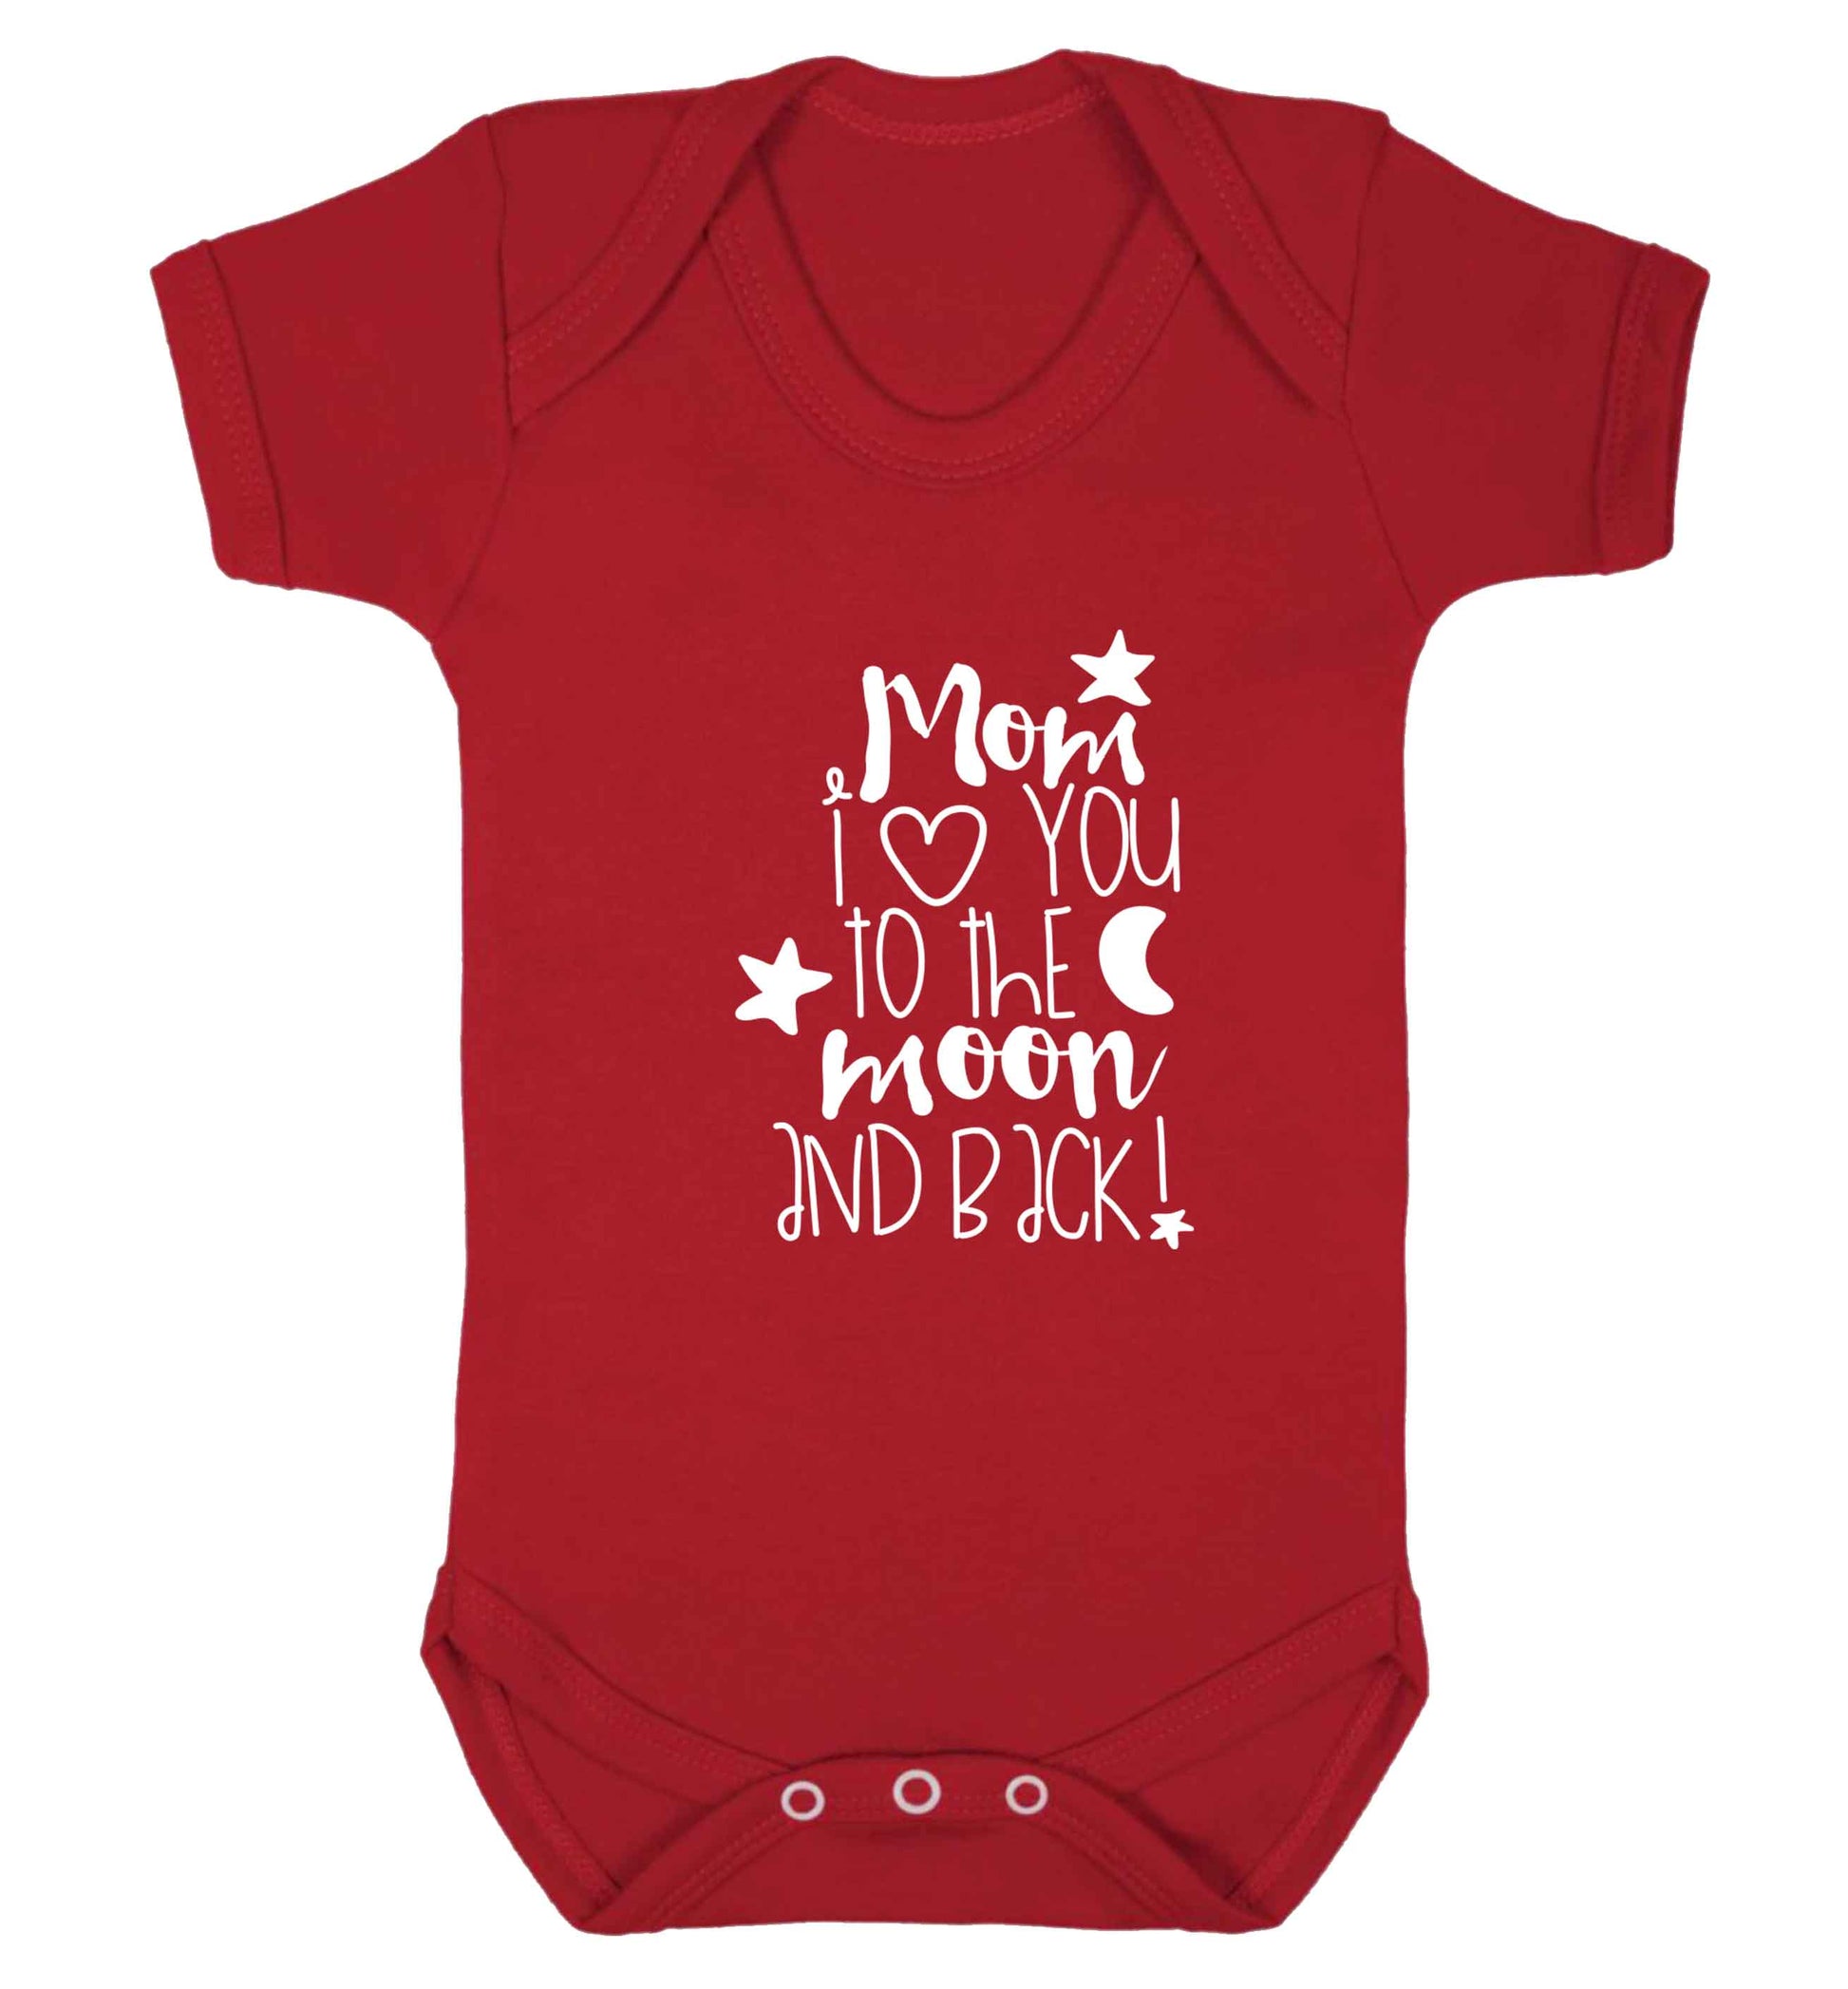 Mom I love you to the moon and back baby vest red 18-24 months